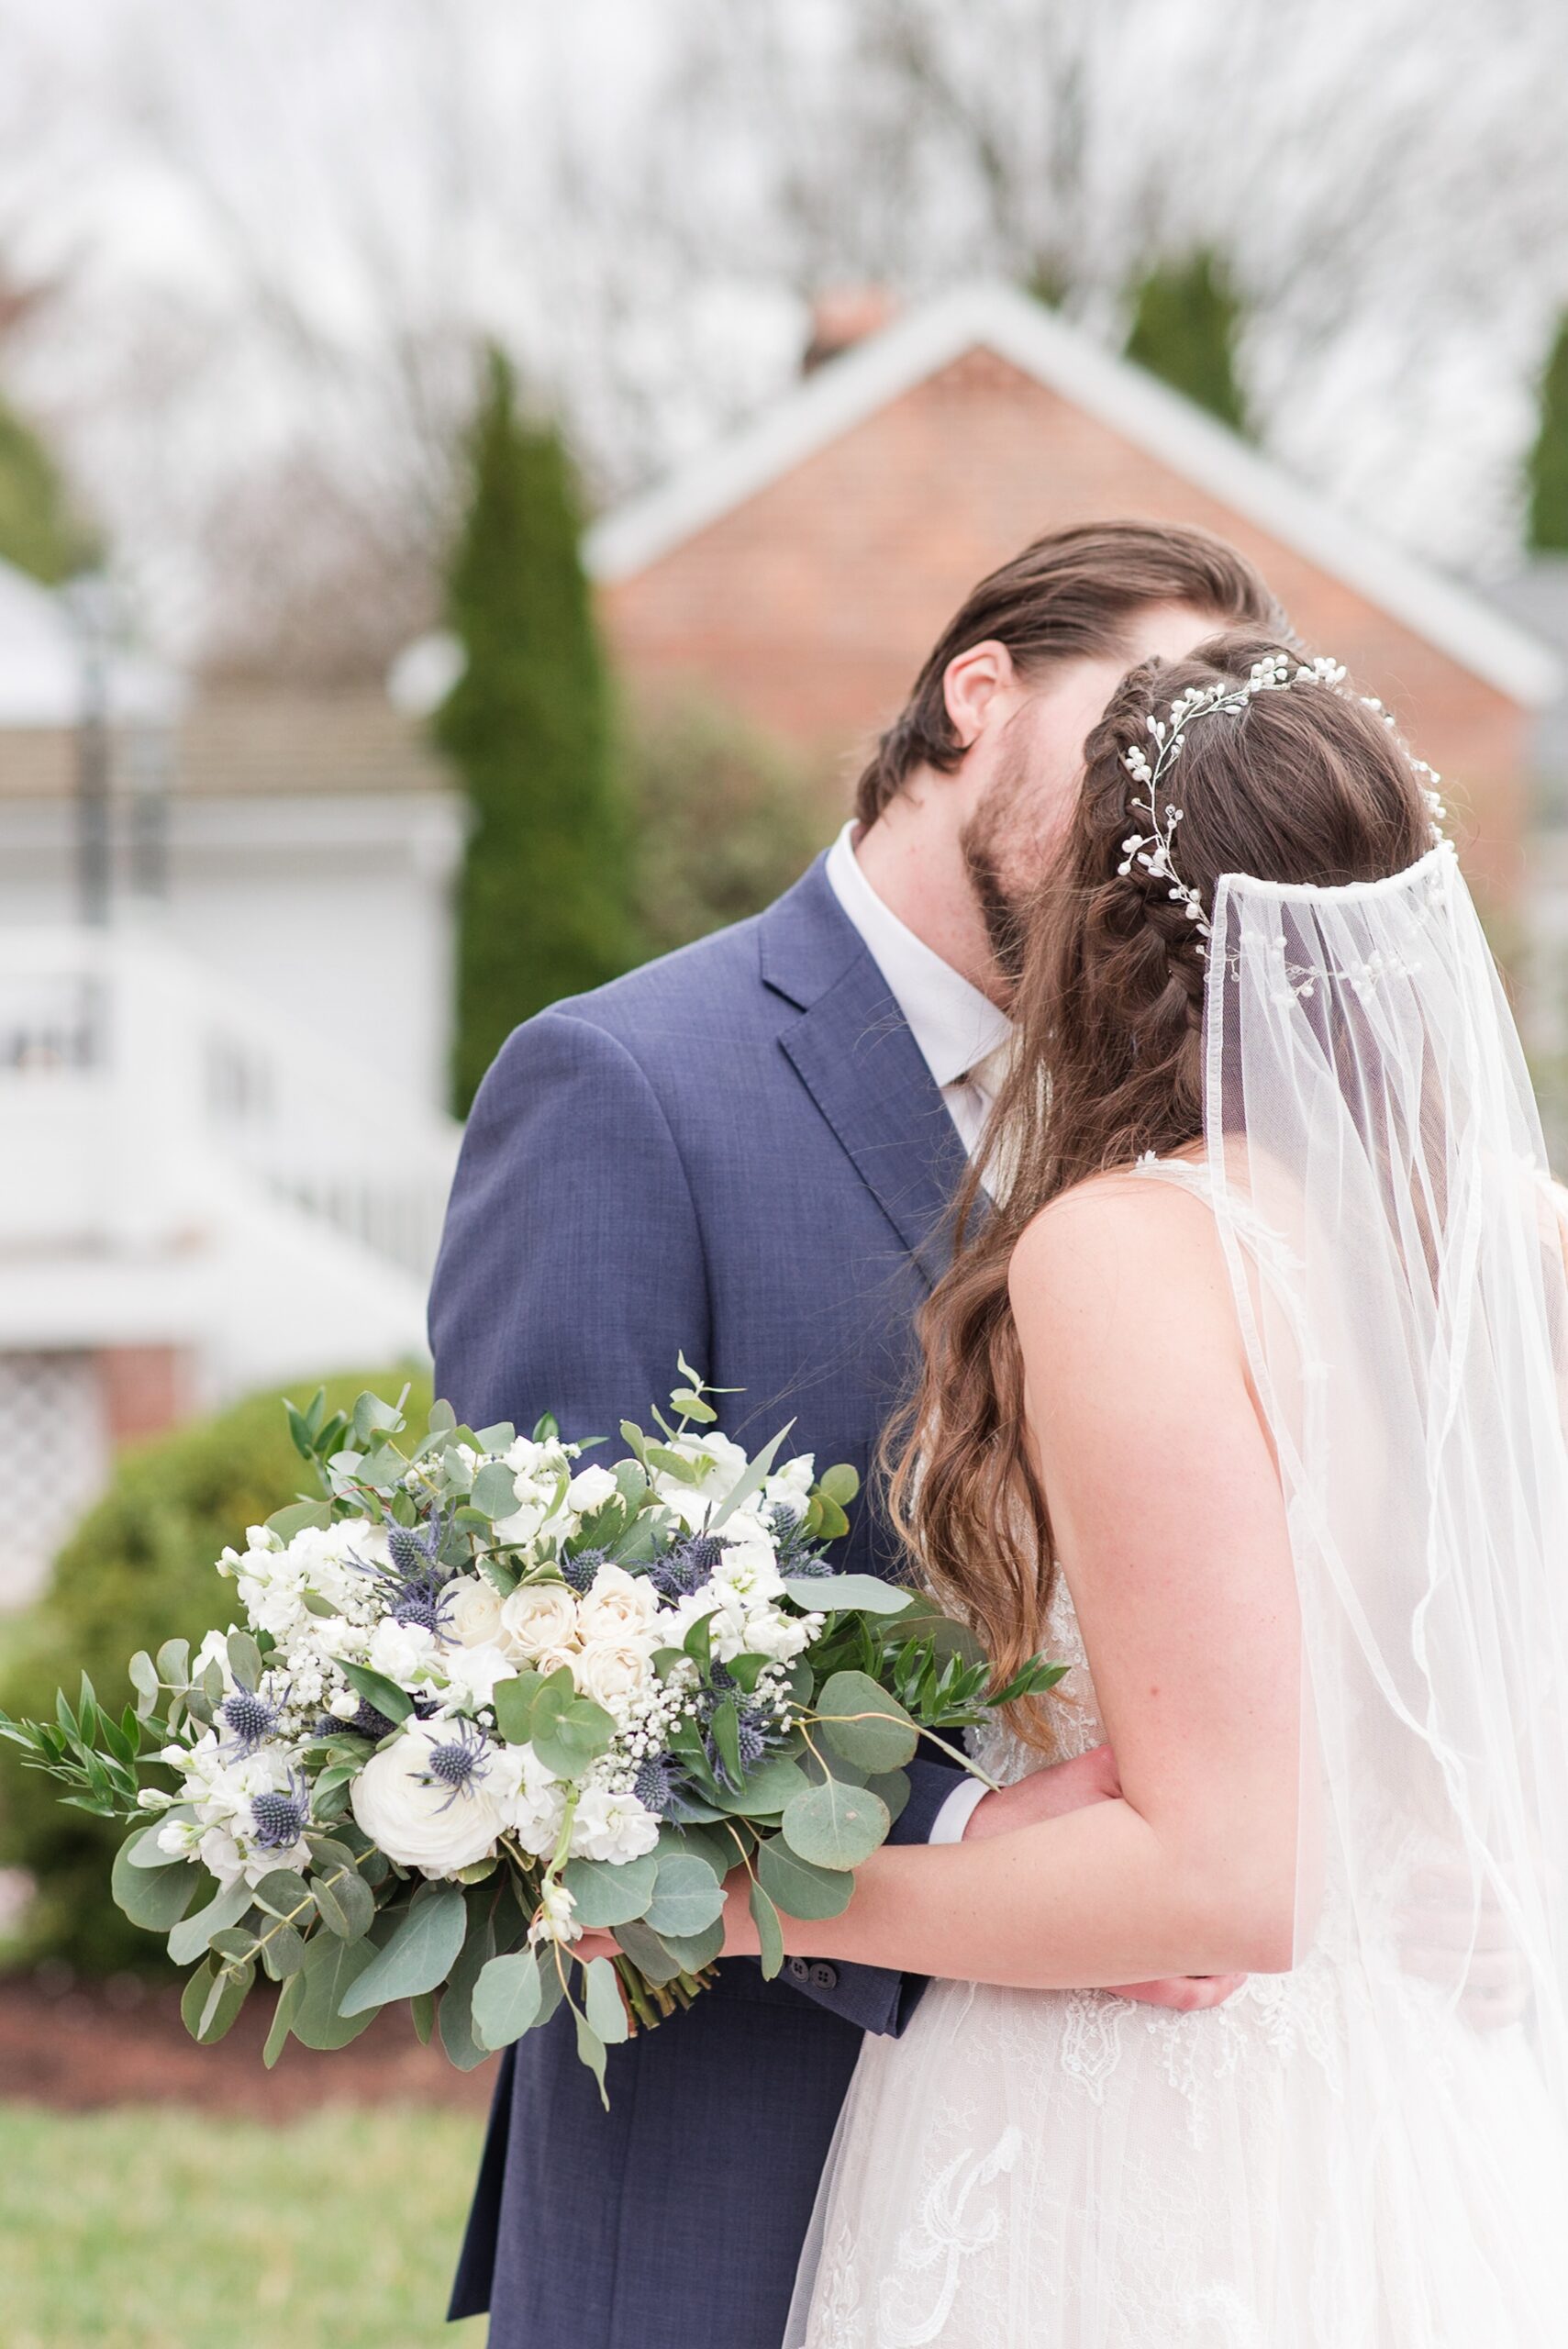 Newlyweds kiss while holding a unique bouquet in a lawn